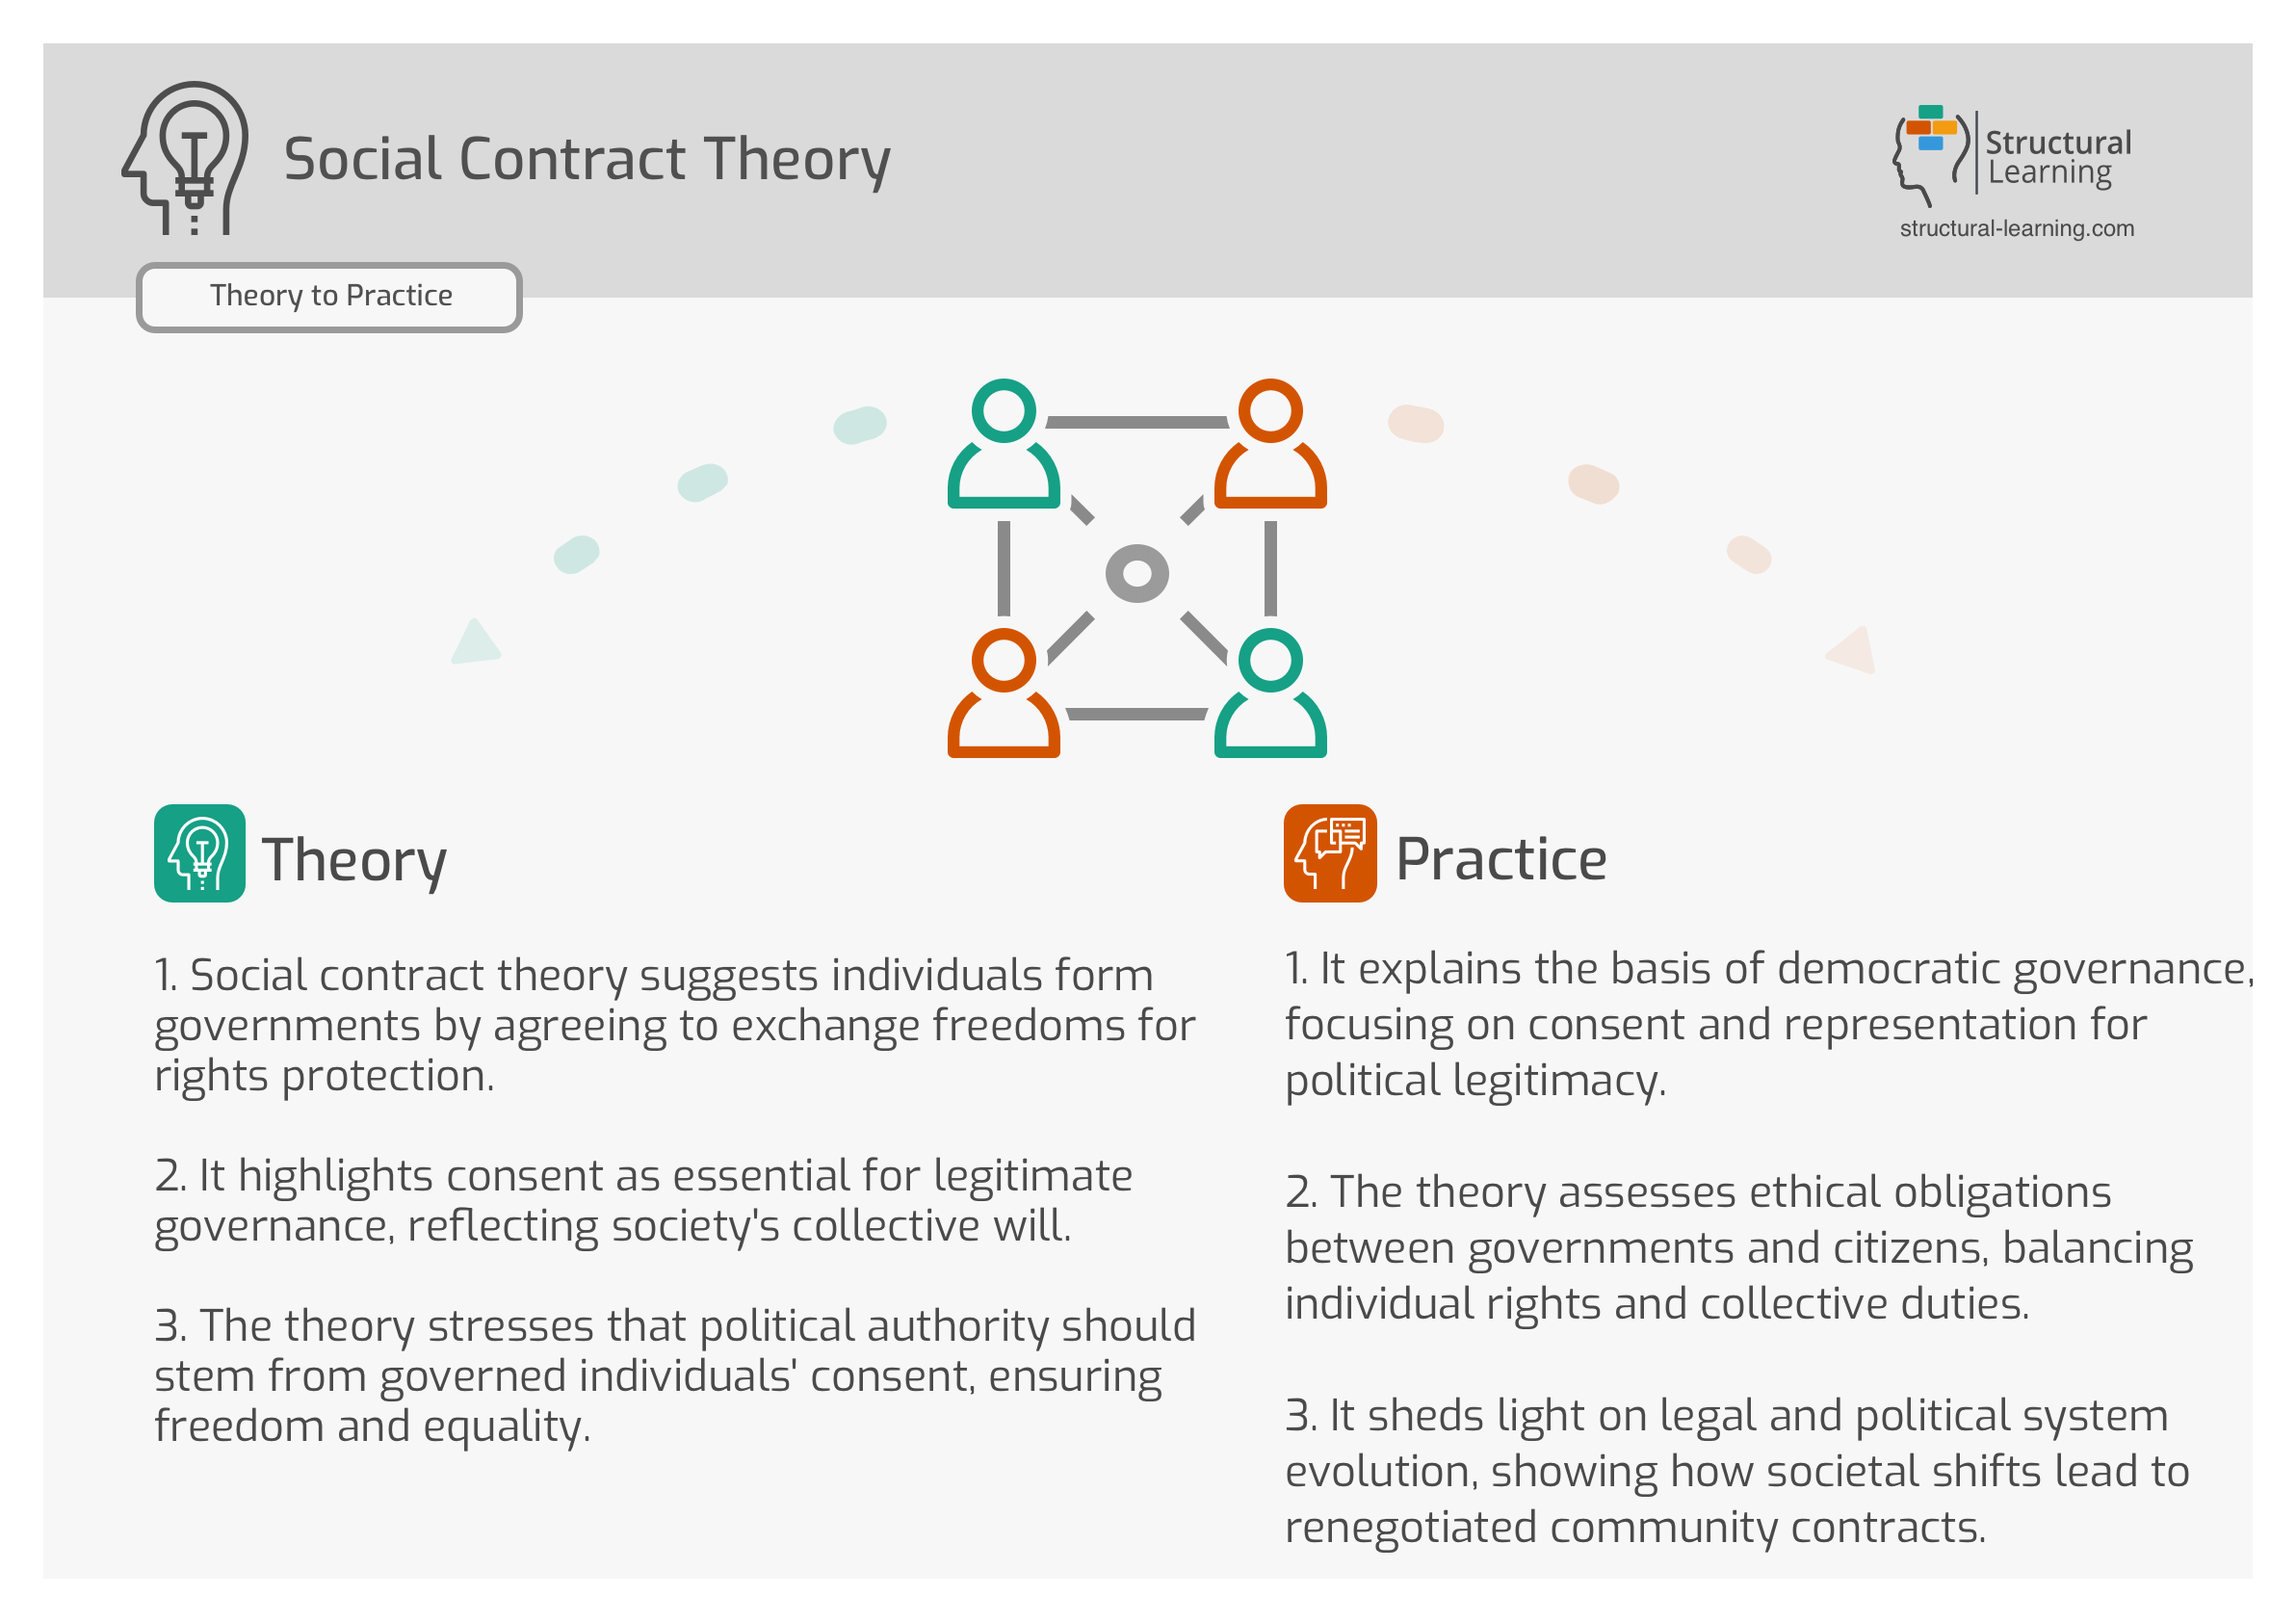 Social Contract Theory Explained